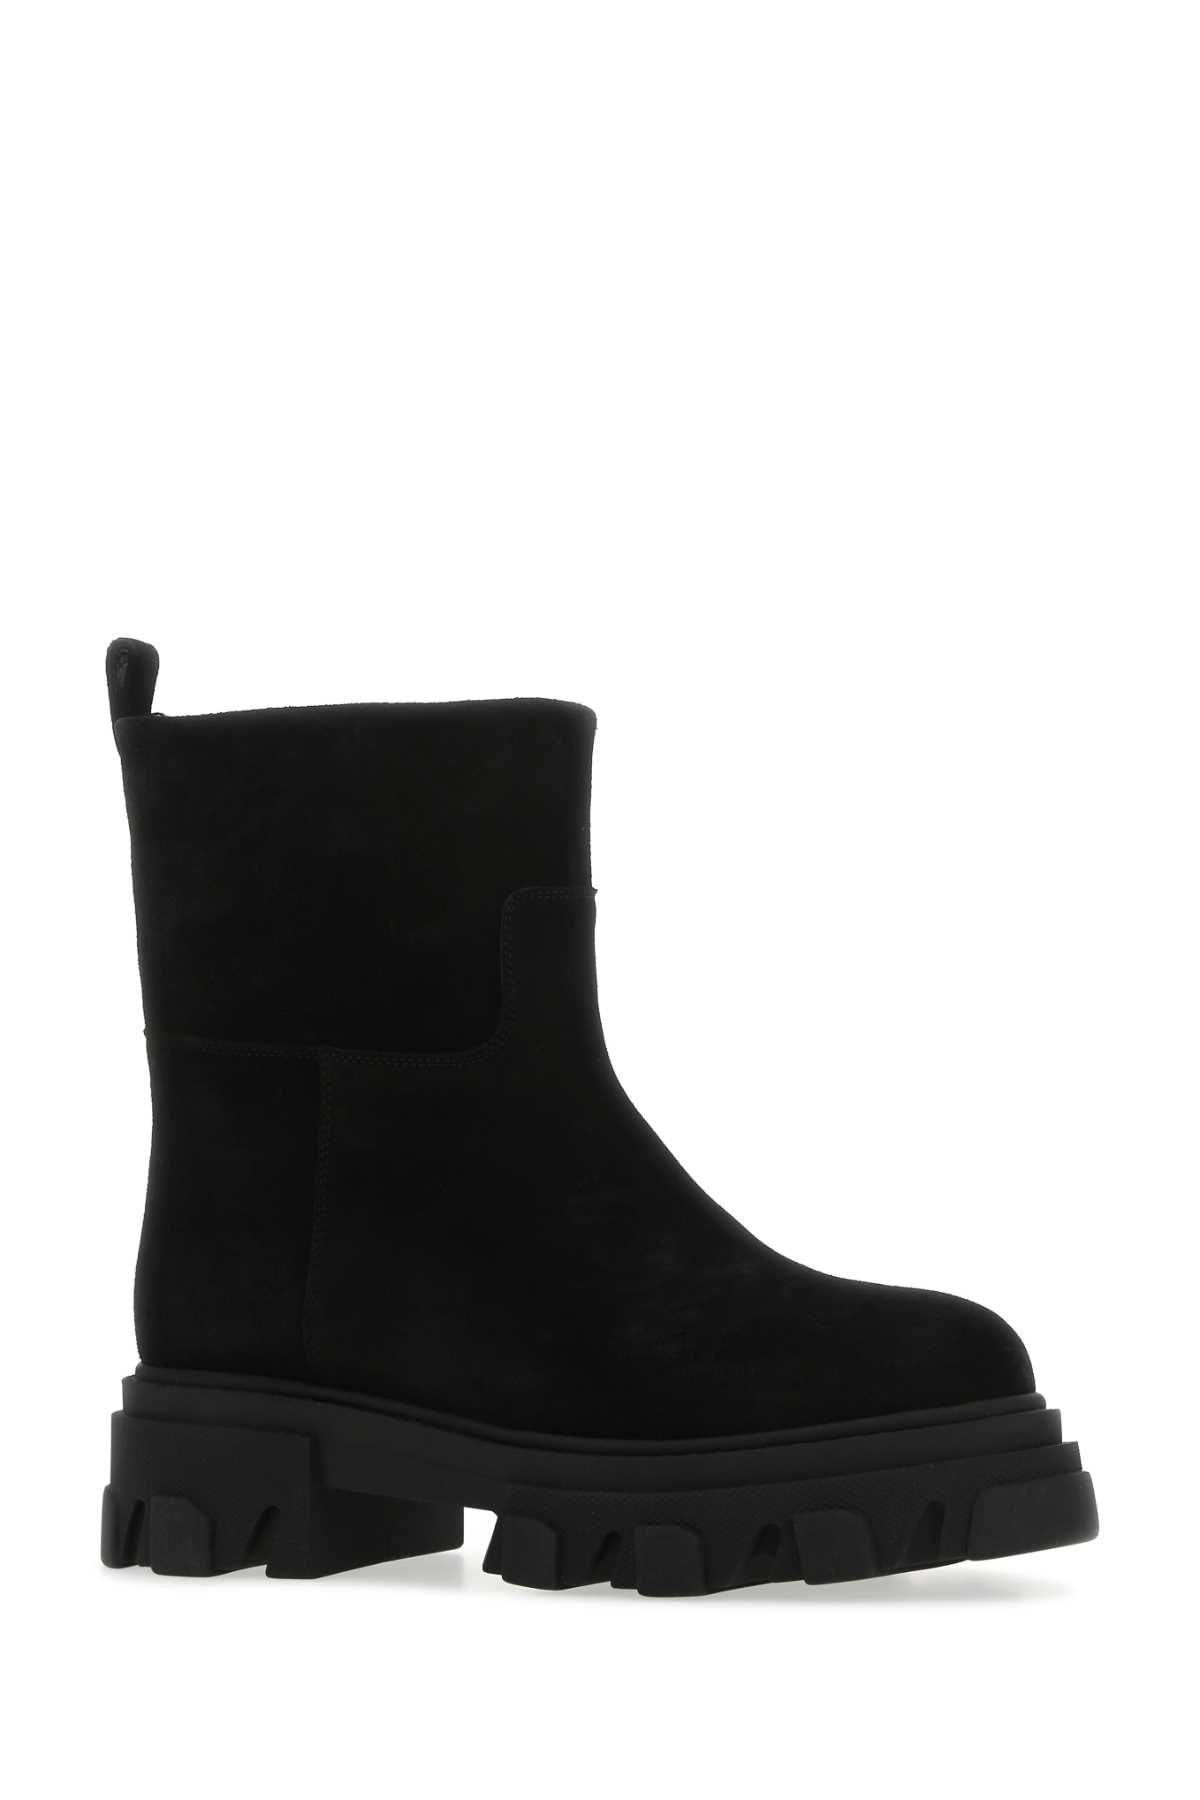 Gia Borghini Black Suede Ankle Boots In 5000